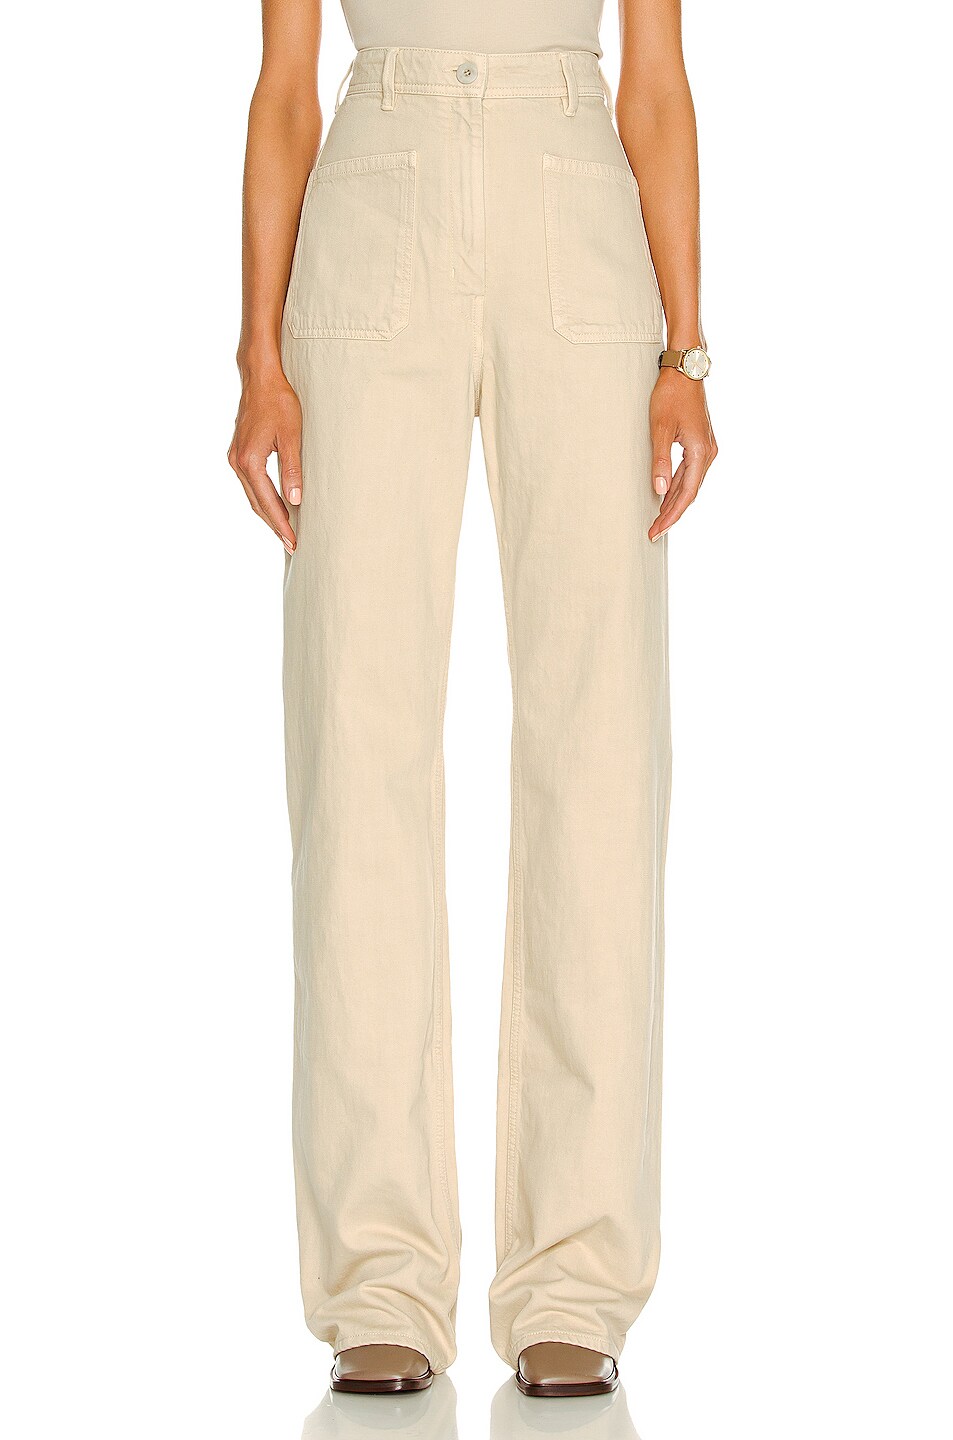 Image 1 of Lemaire Denim Sailor Pant in Saltpeter